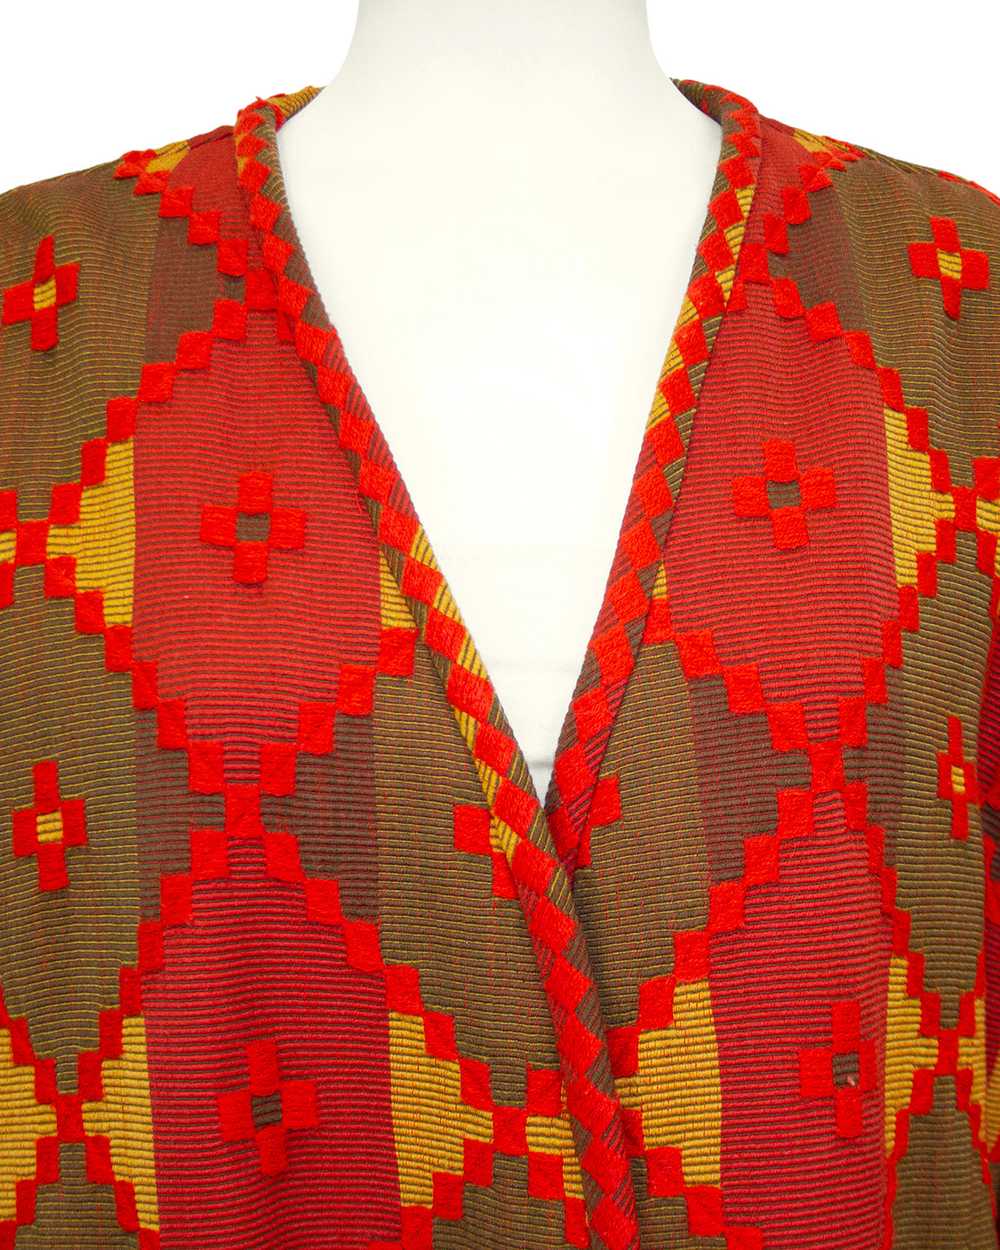 Valentino Red and Brown Embroidered Aztec Jacket - image 4